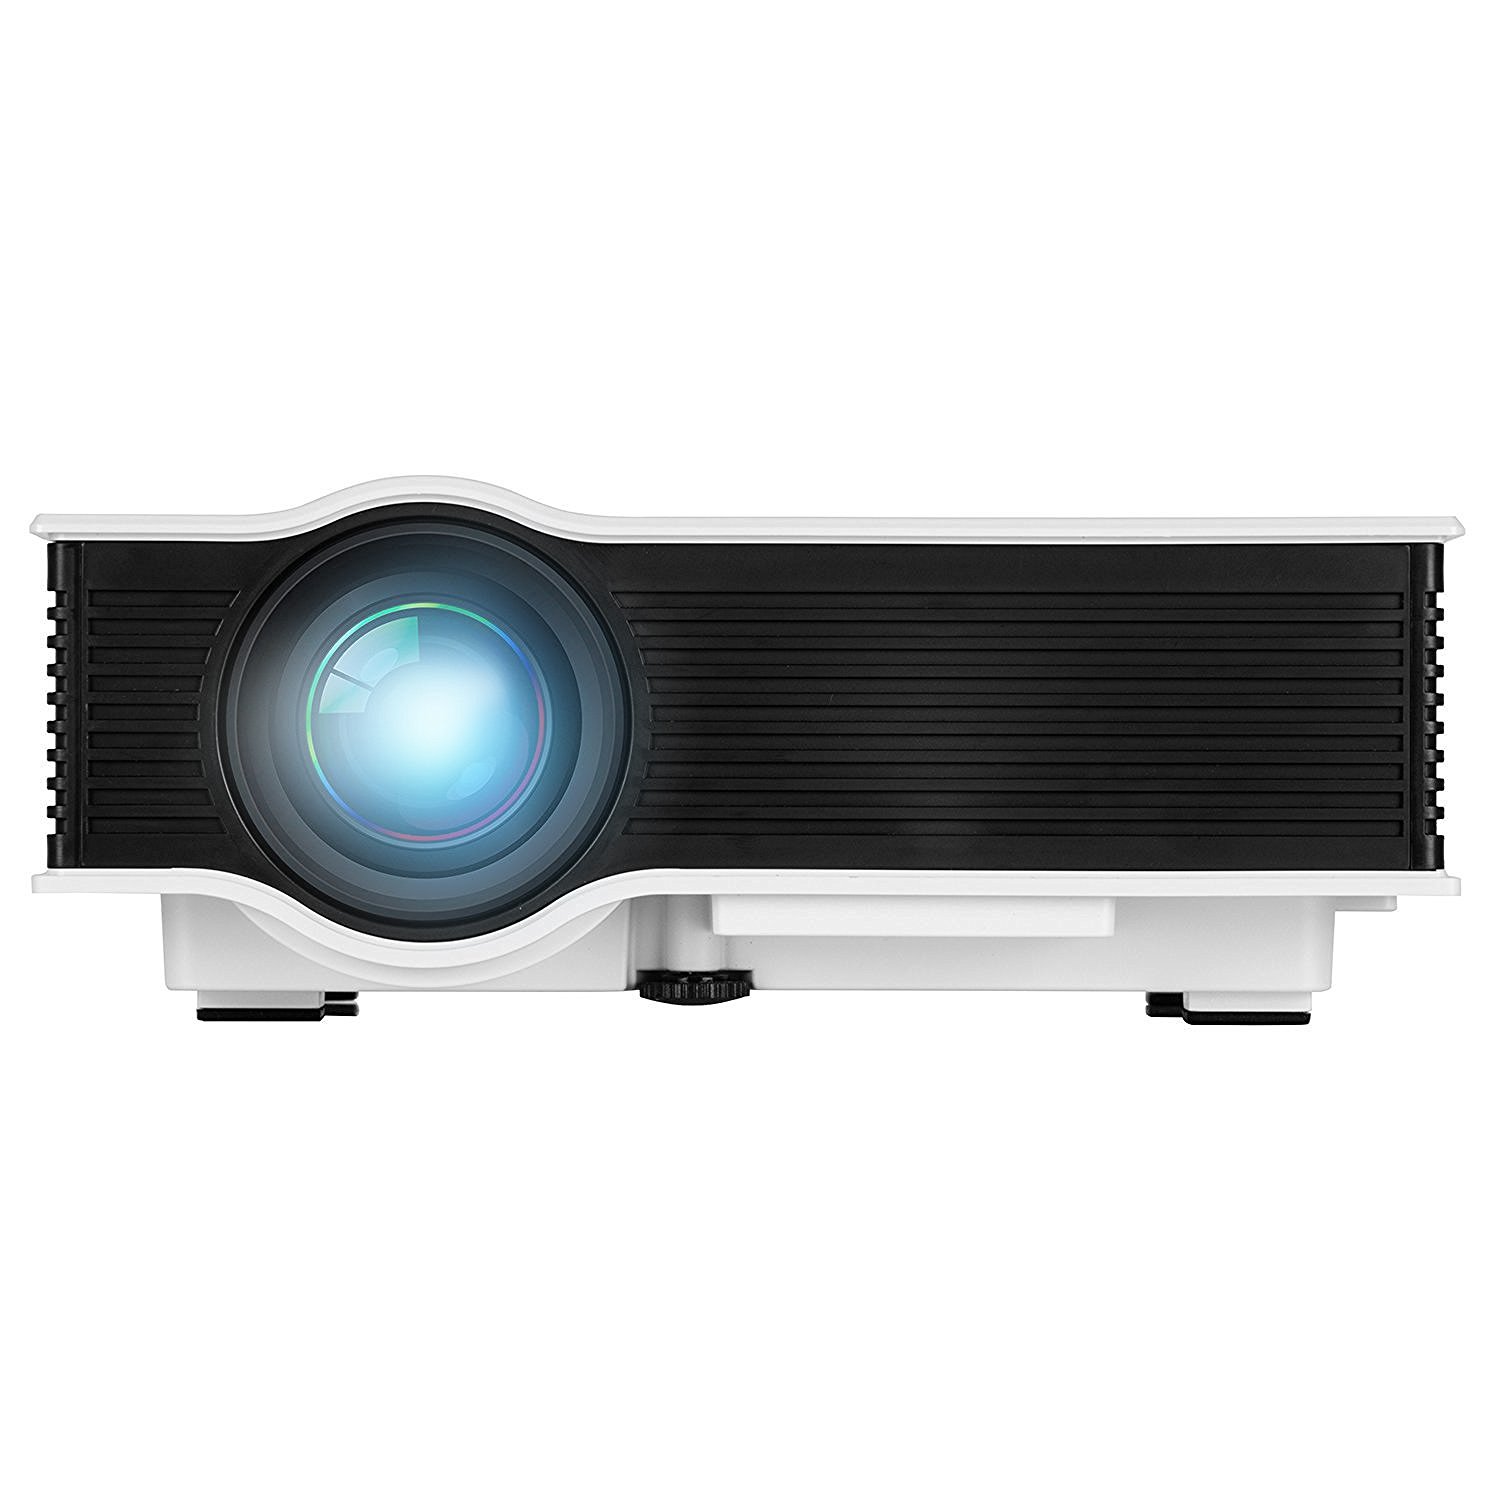 LED Projector (Warranty Included), ERISAN Updated Full Color 130